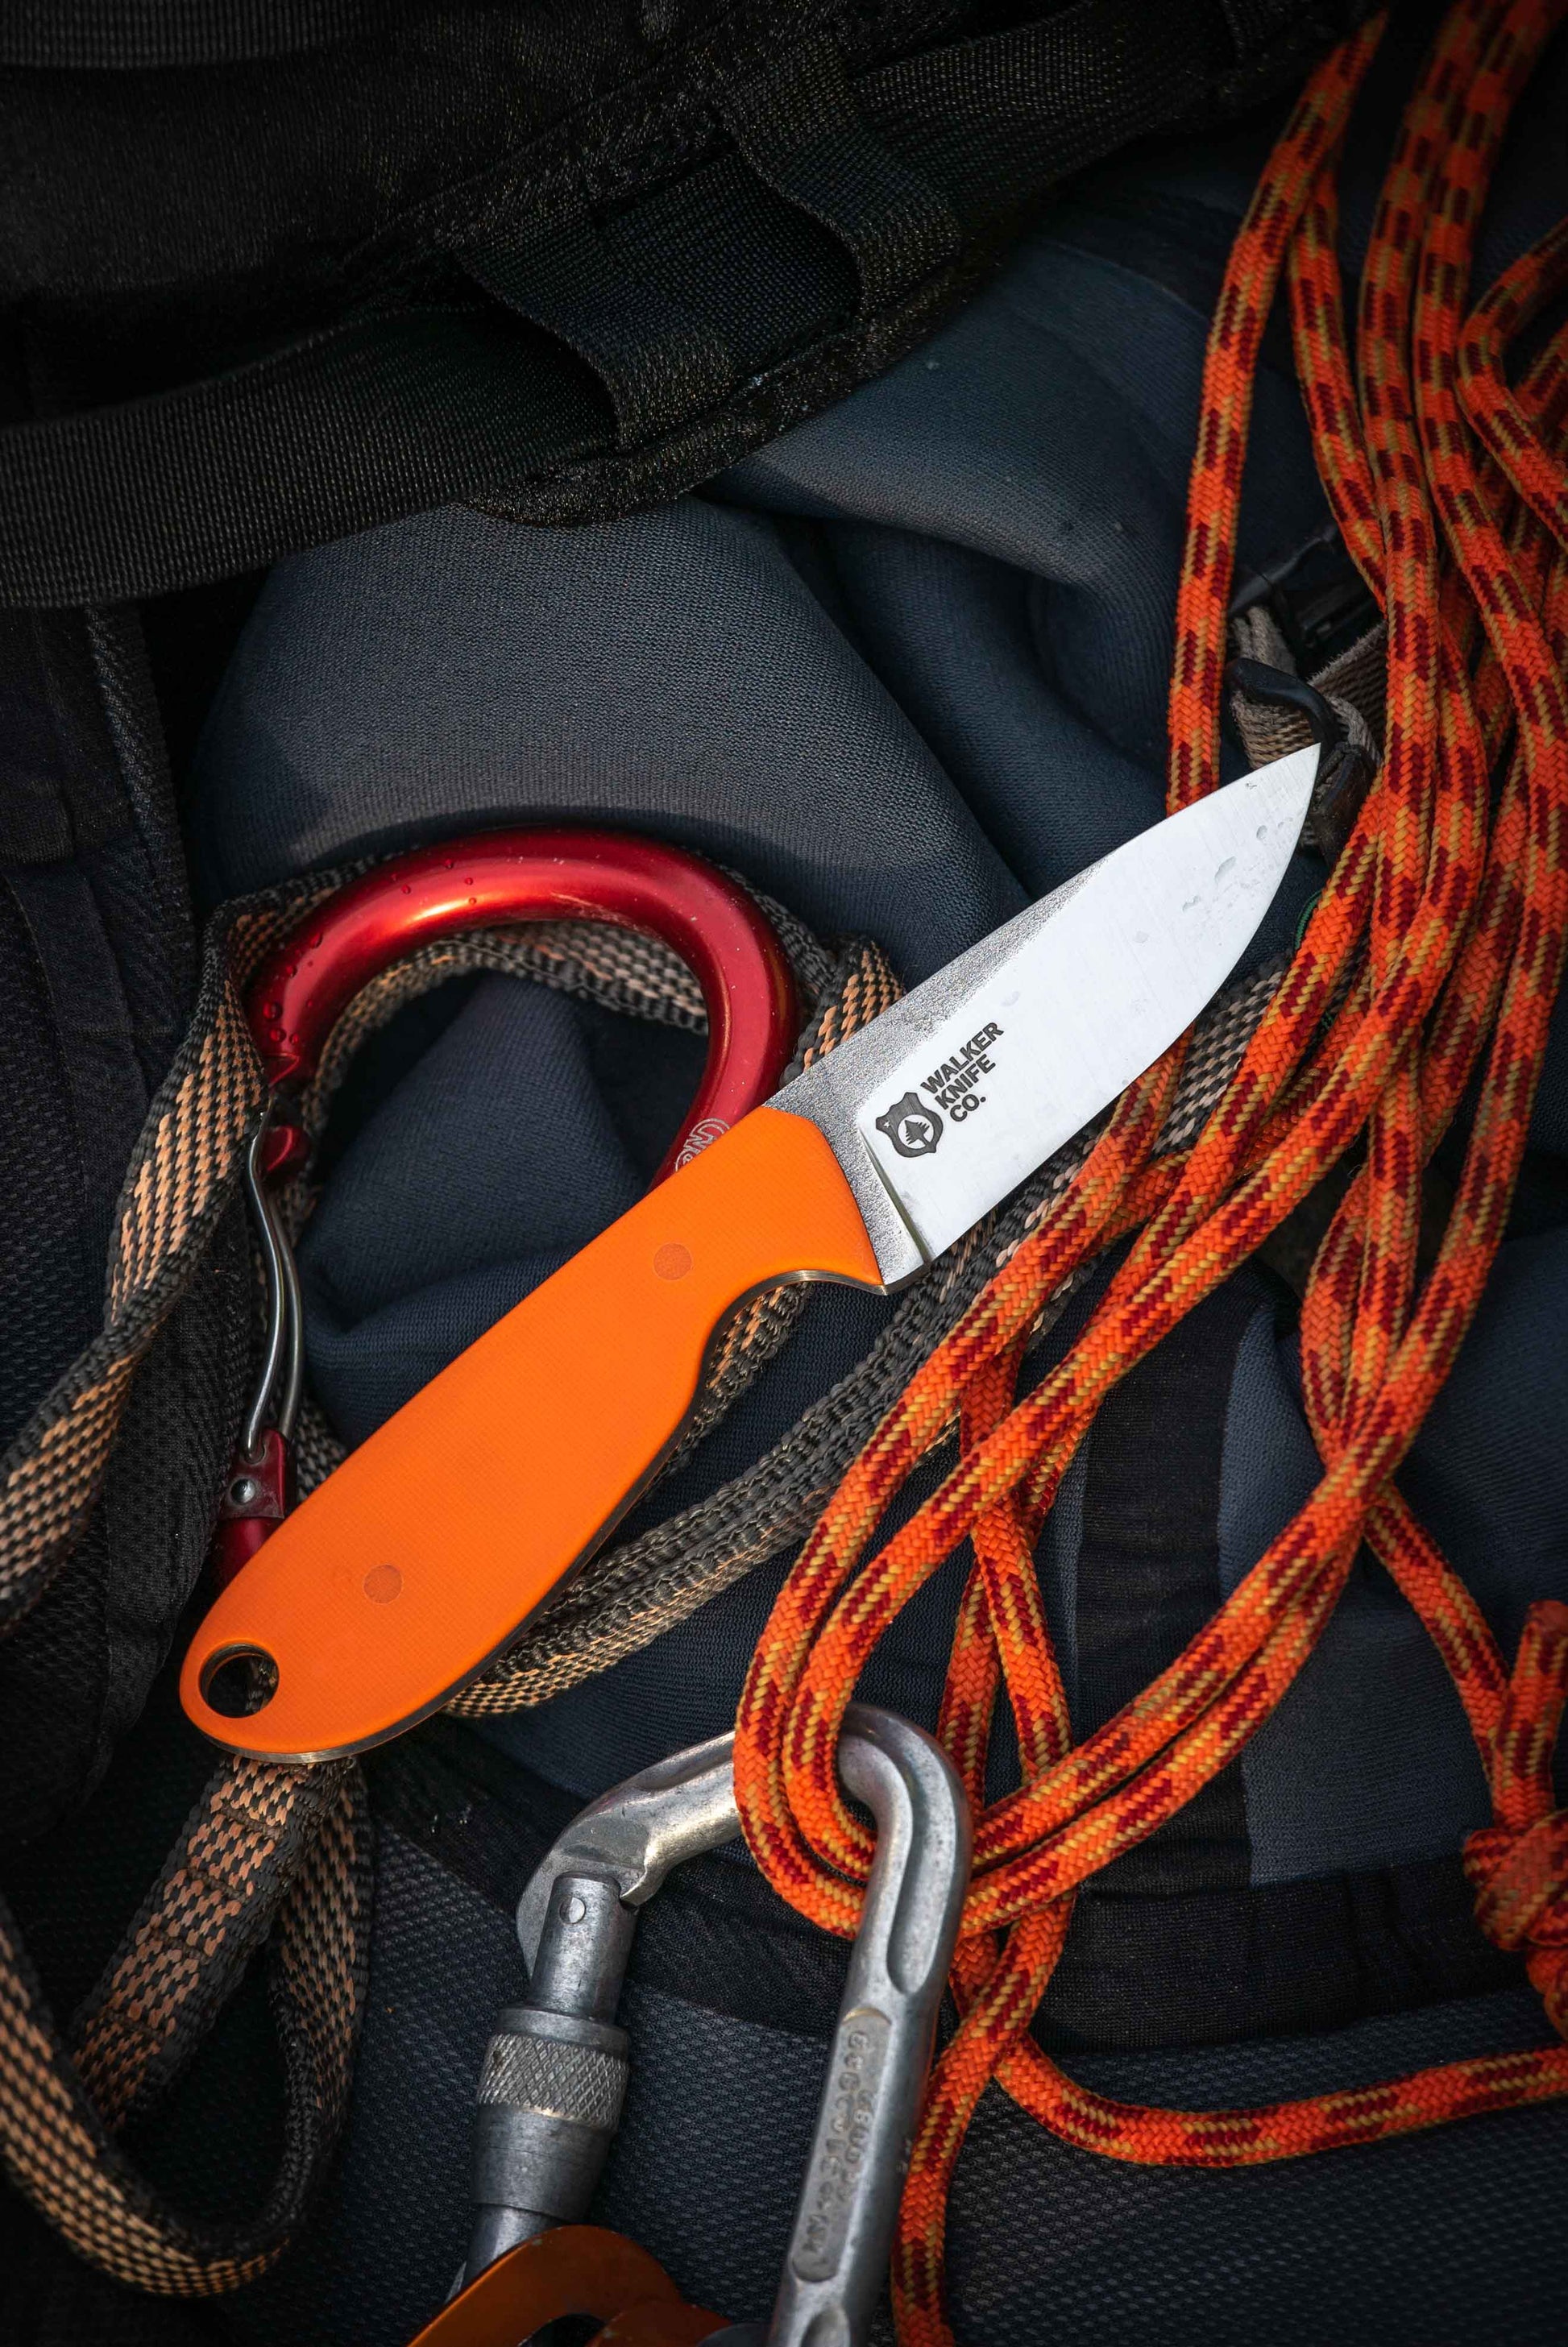 River knife for guides and swiftwater rescue technicians depicted with river safety equipment